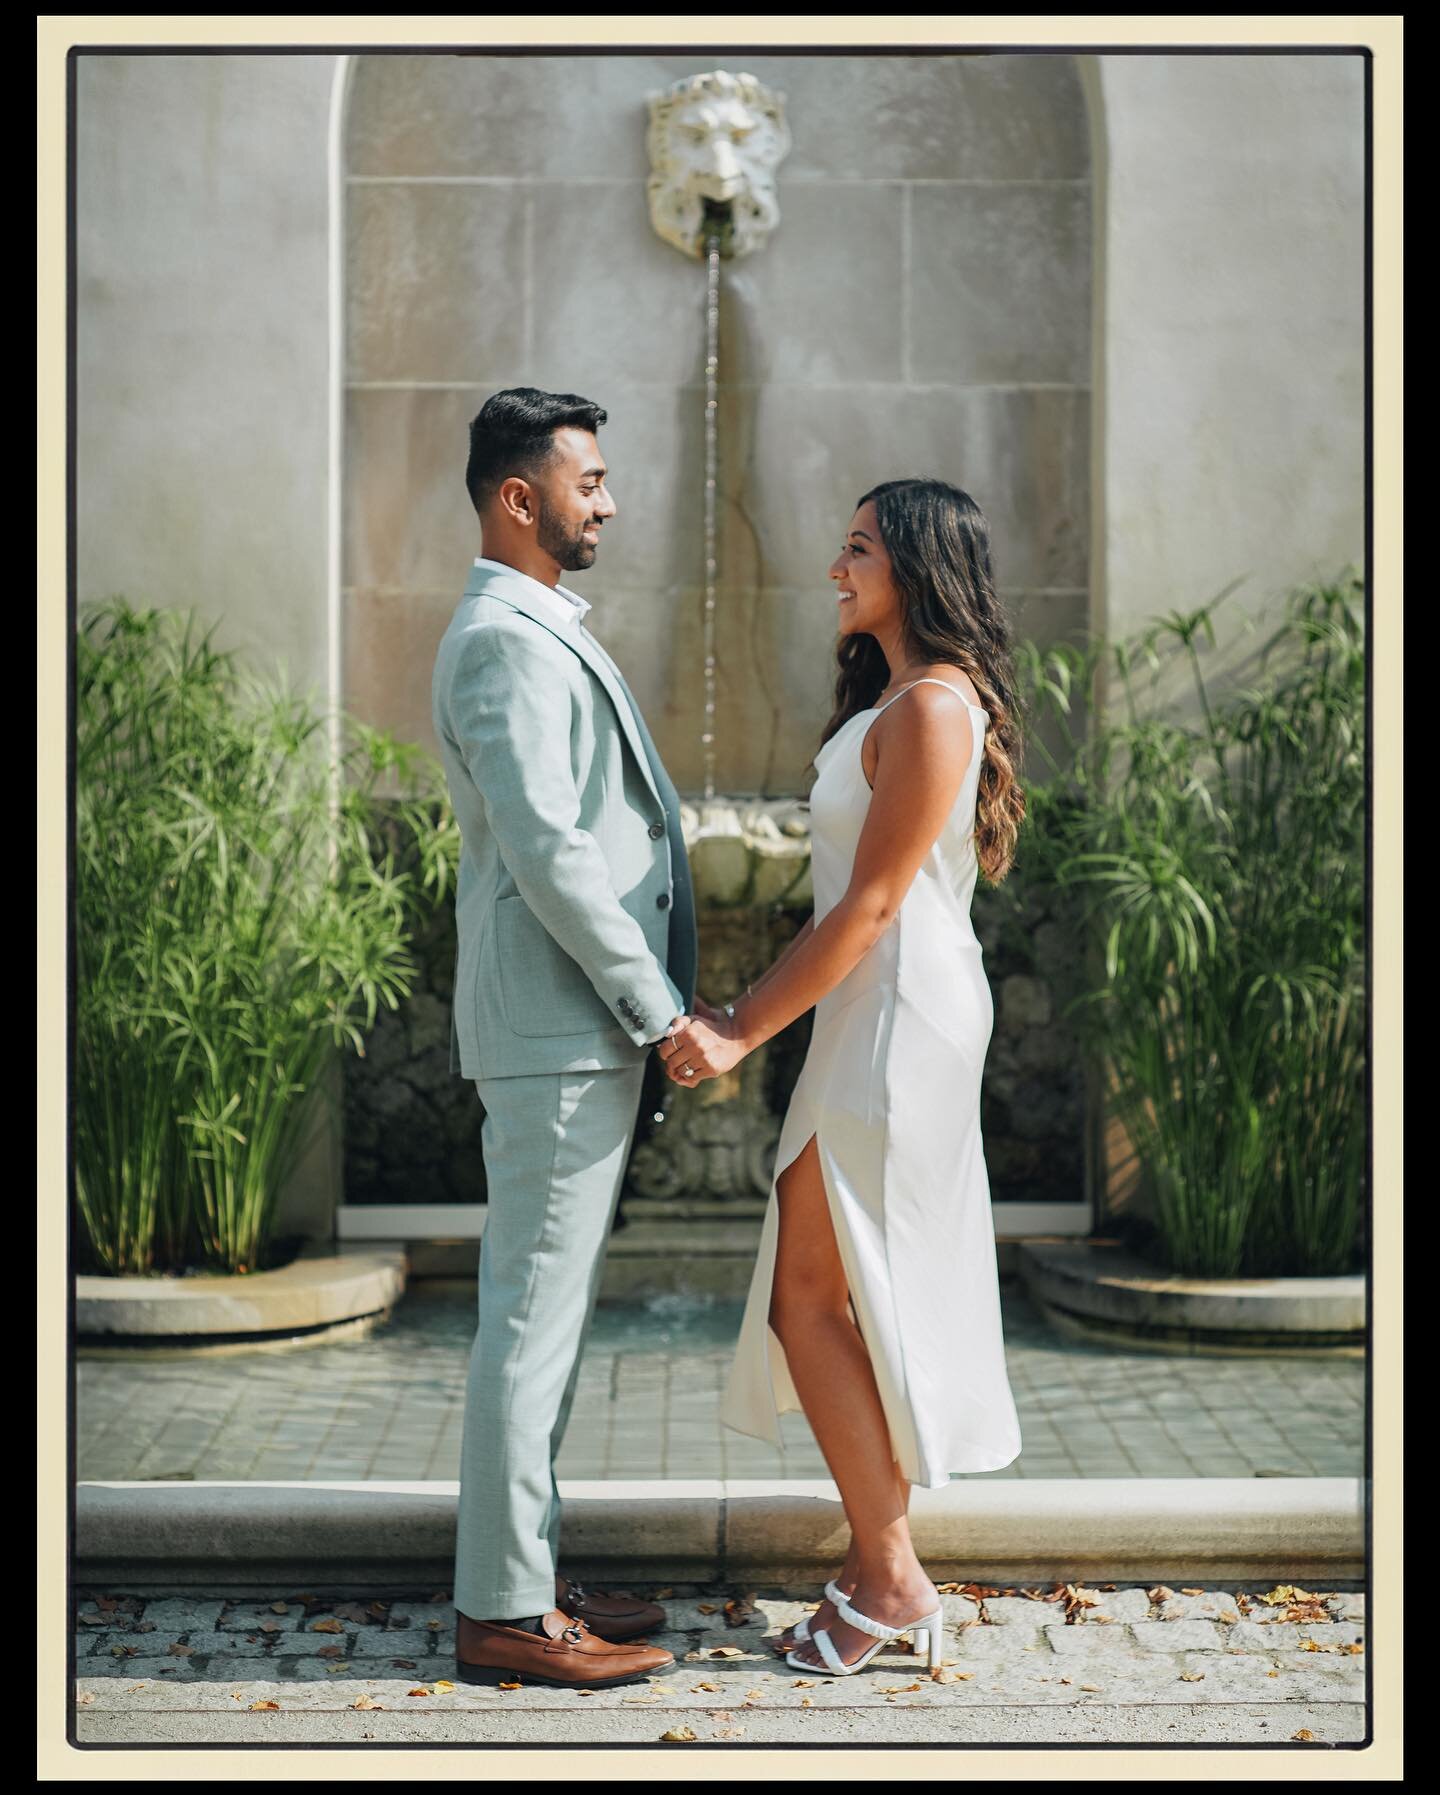 My favorite from this save the date shoot 🔥
.
.
.
#longwoodgardens #fancy #dressedtothenines #marblewall #portraitphotography #savethedatephotos #couplesphotosession #goldenhourphotography @lina.cecilia with the help as always 💕